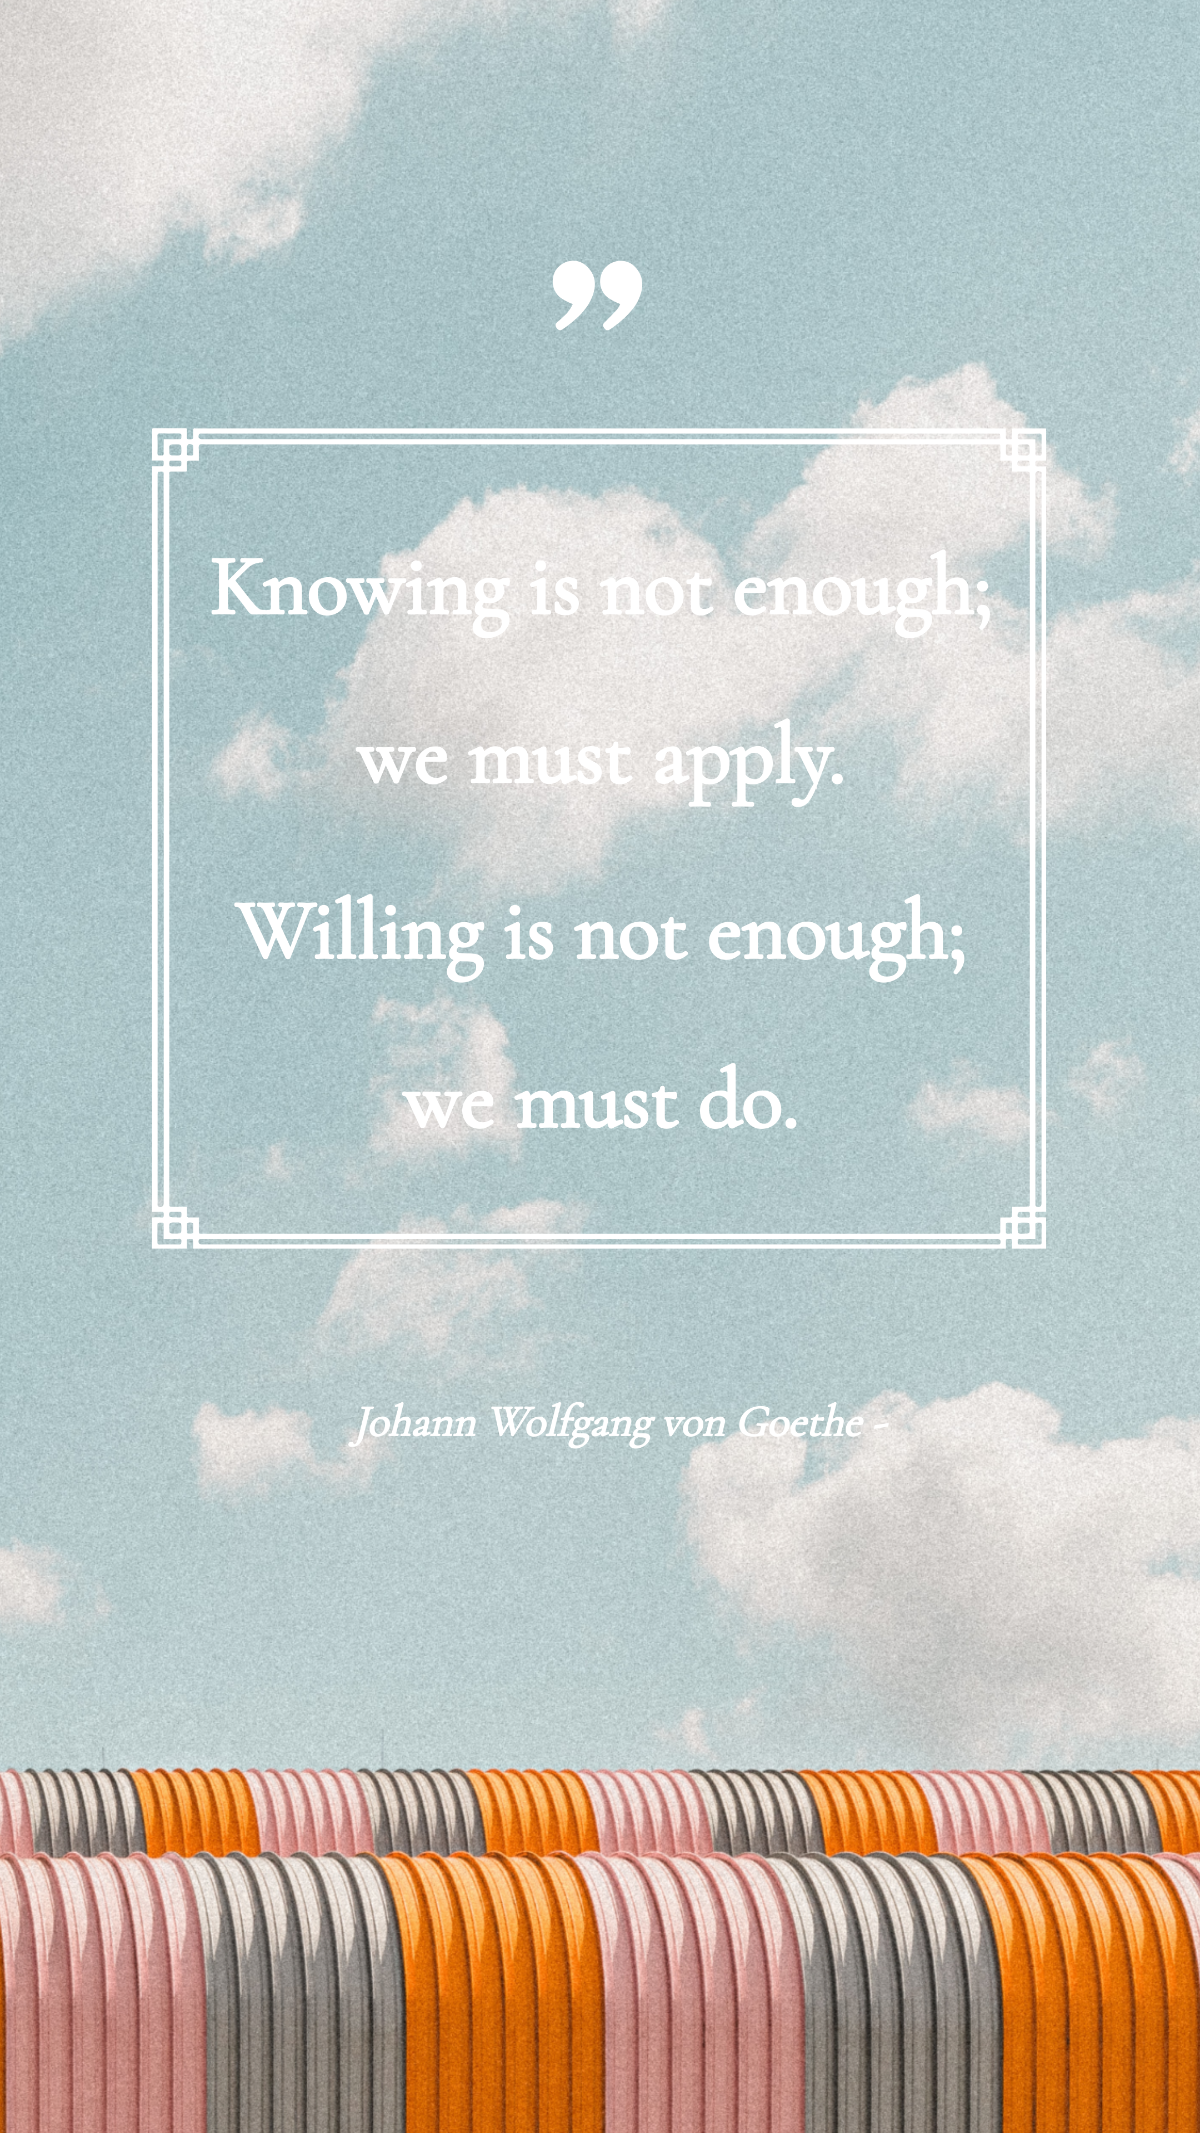 Johann Wolfgang von Goethe - Knowing is not enough; we must apply. Willing is not enough; we must do. Template